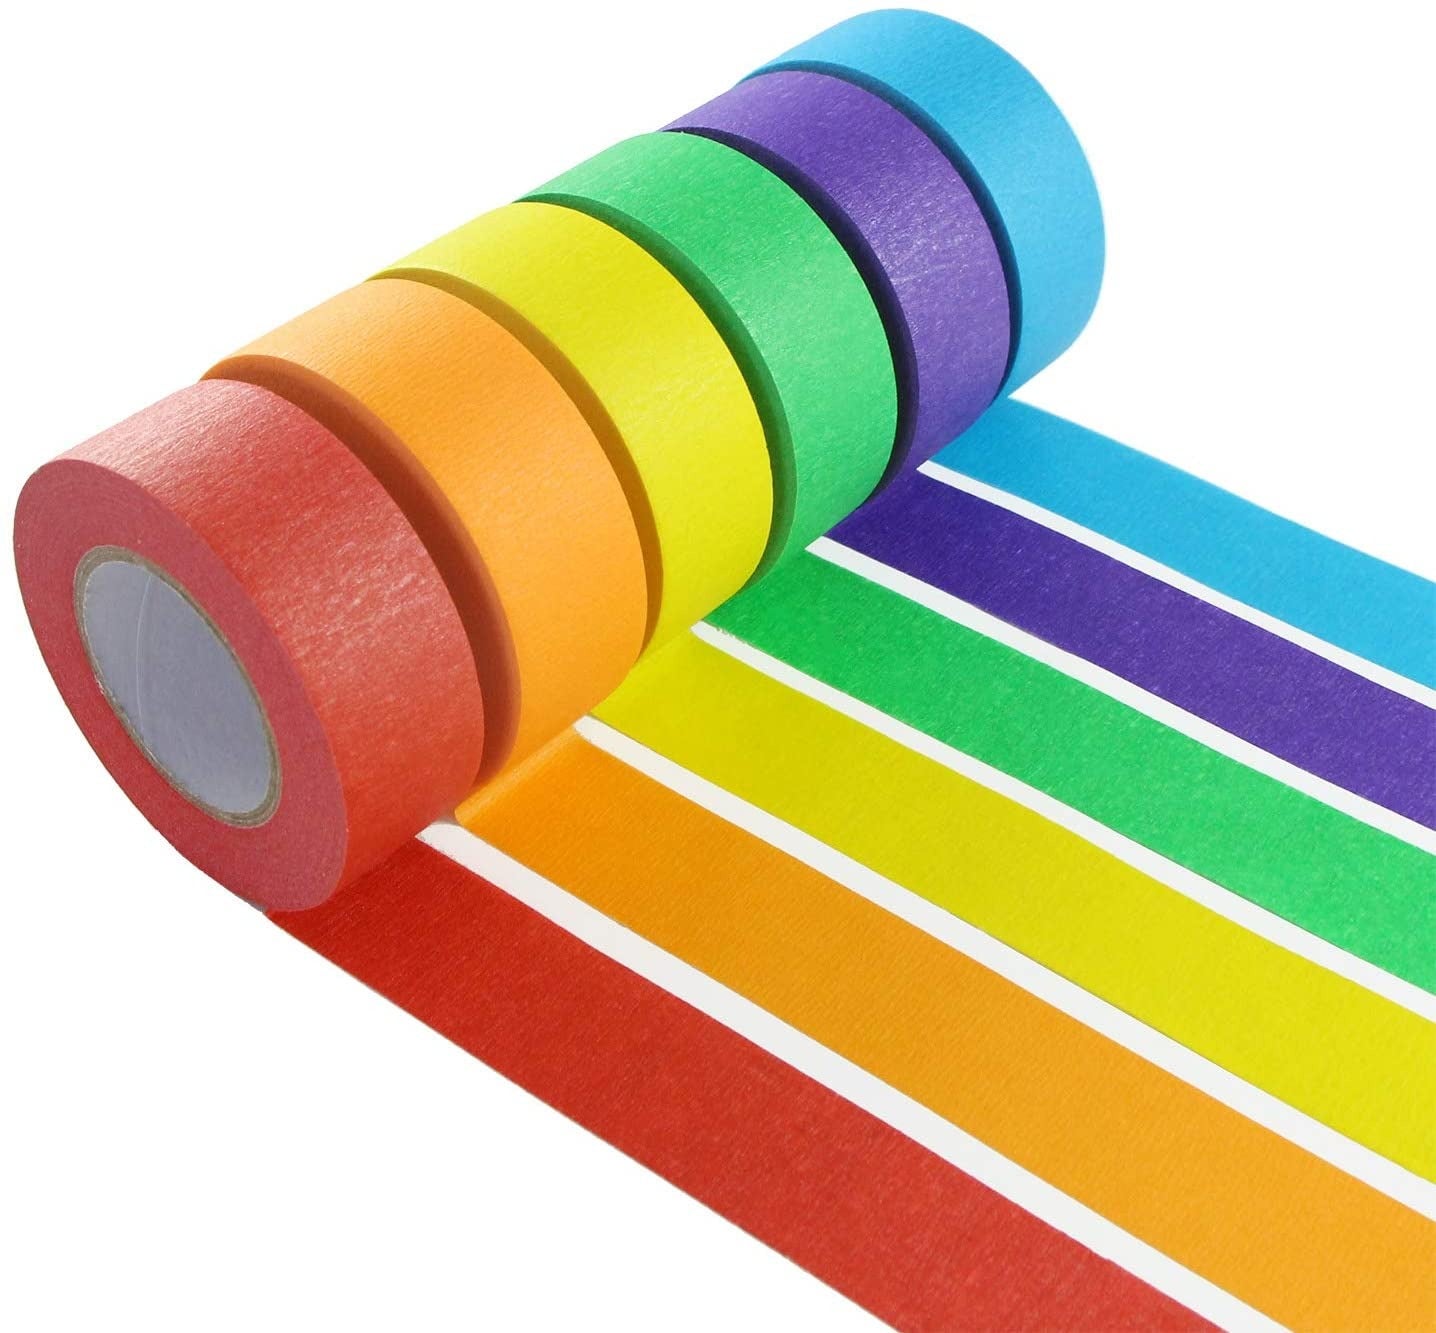 Craftzilla + Colored Masking Tape – 6 Pack of 20 Yards x 1 inch